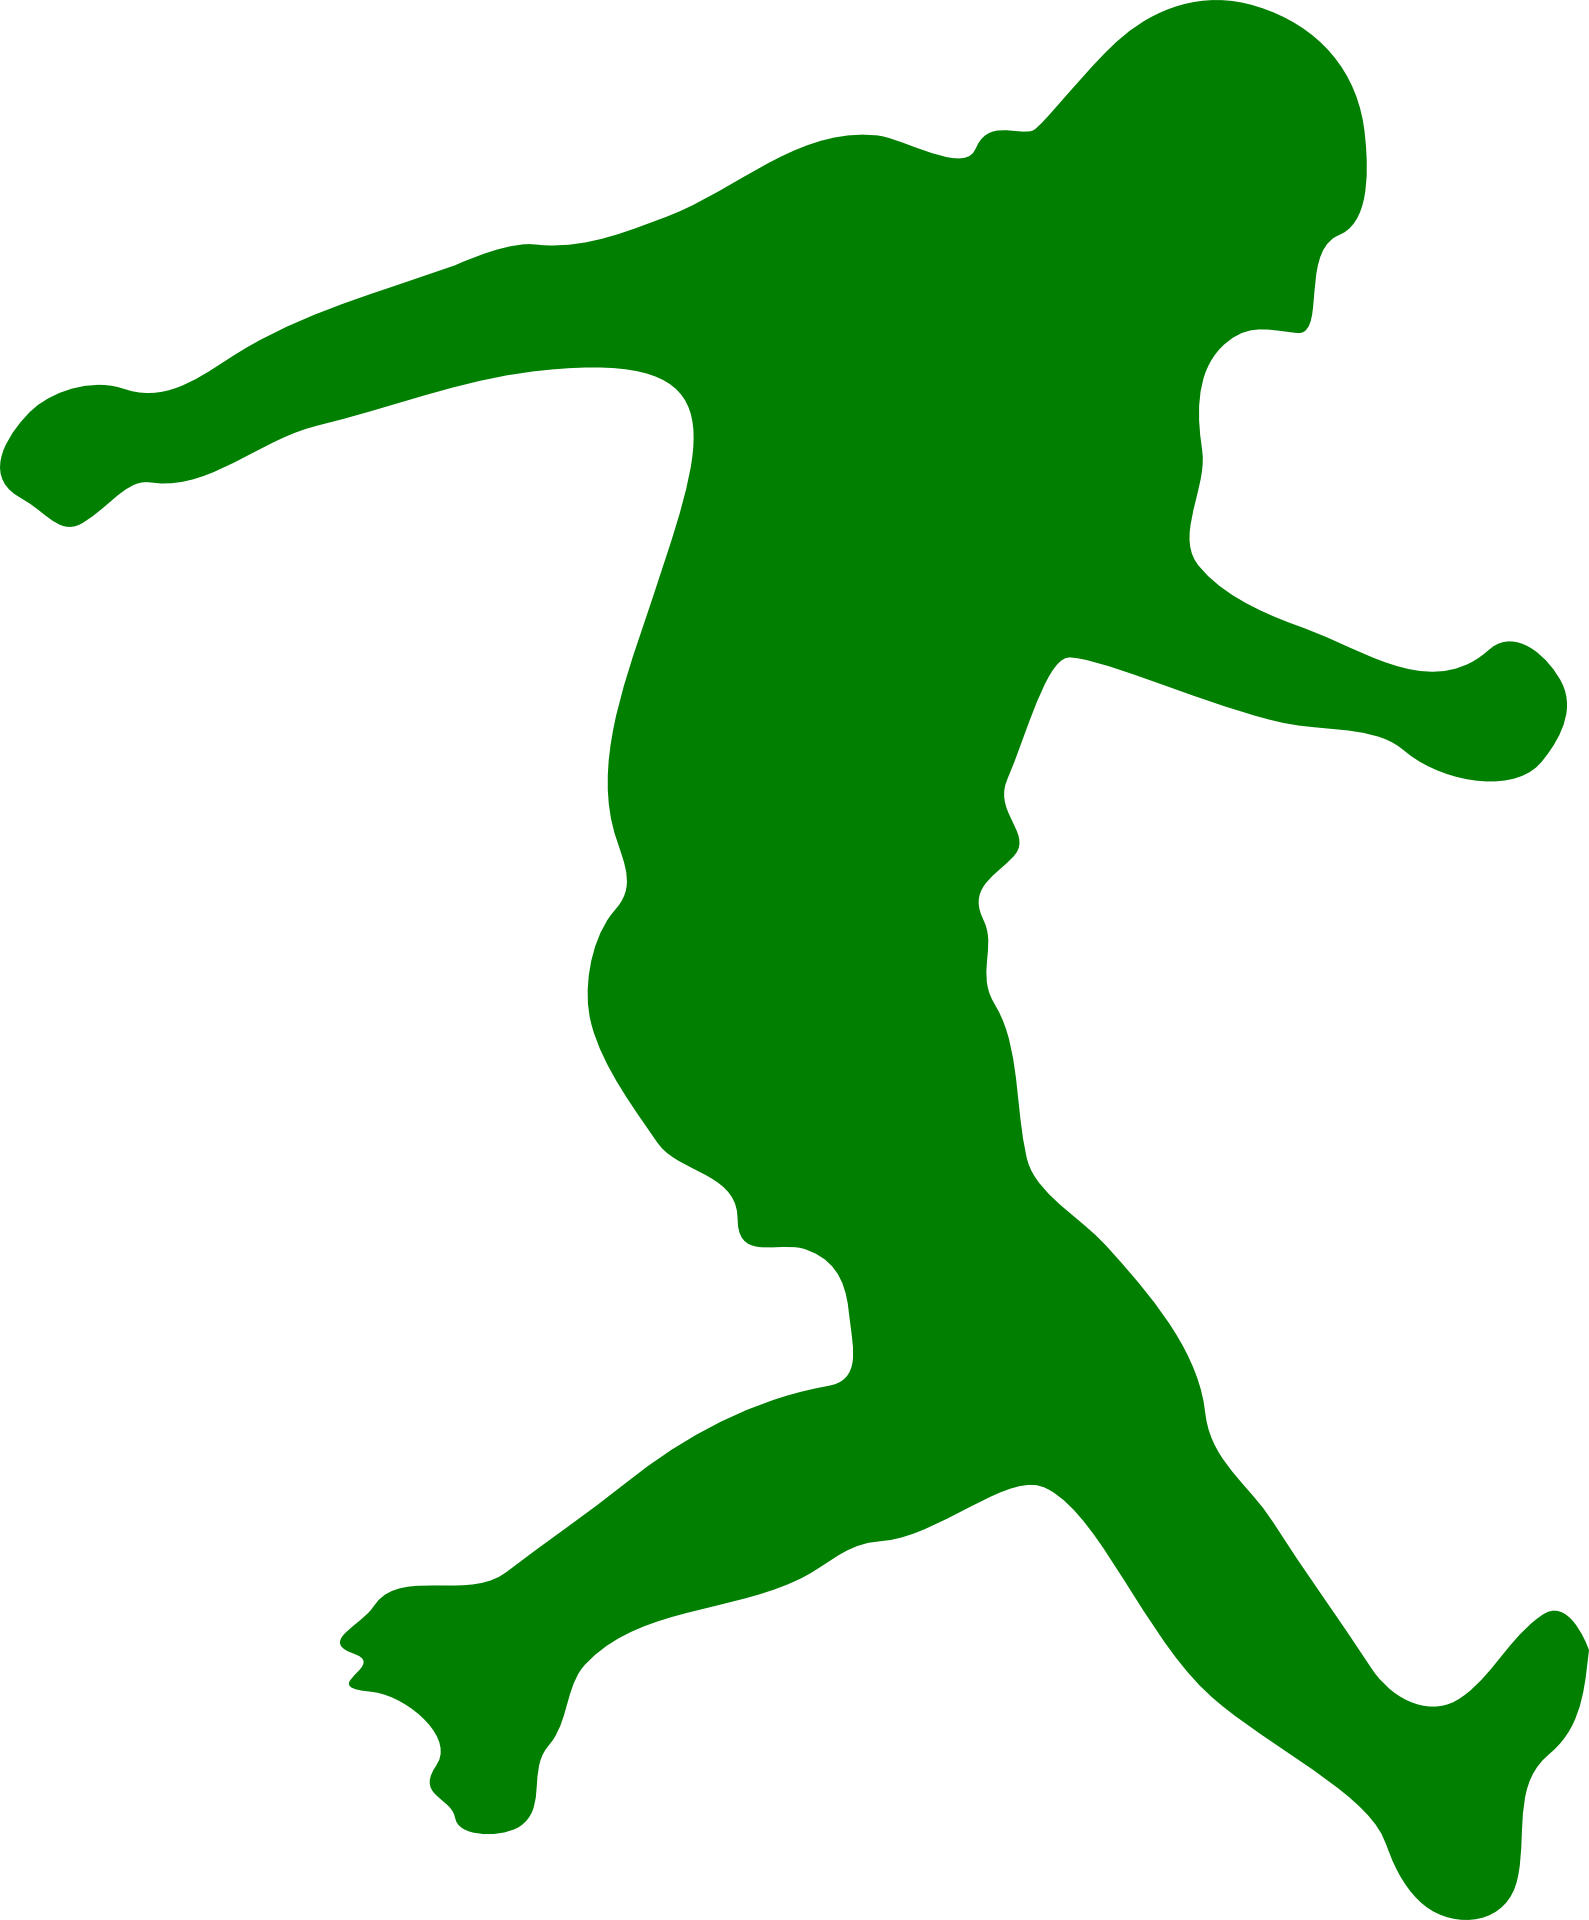 Football Player Silhouette Clip Art - Soccer Player Silhouette (1589x1920)